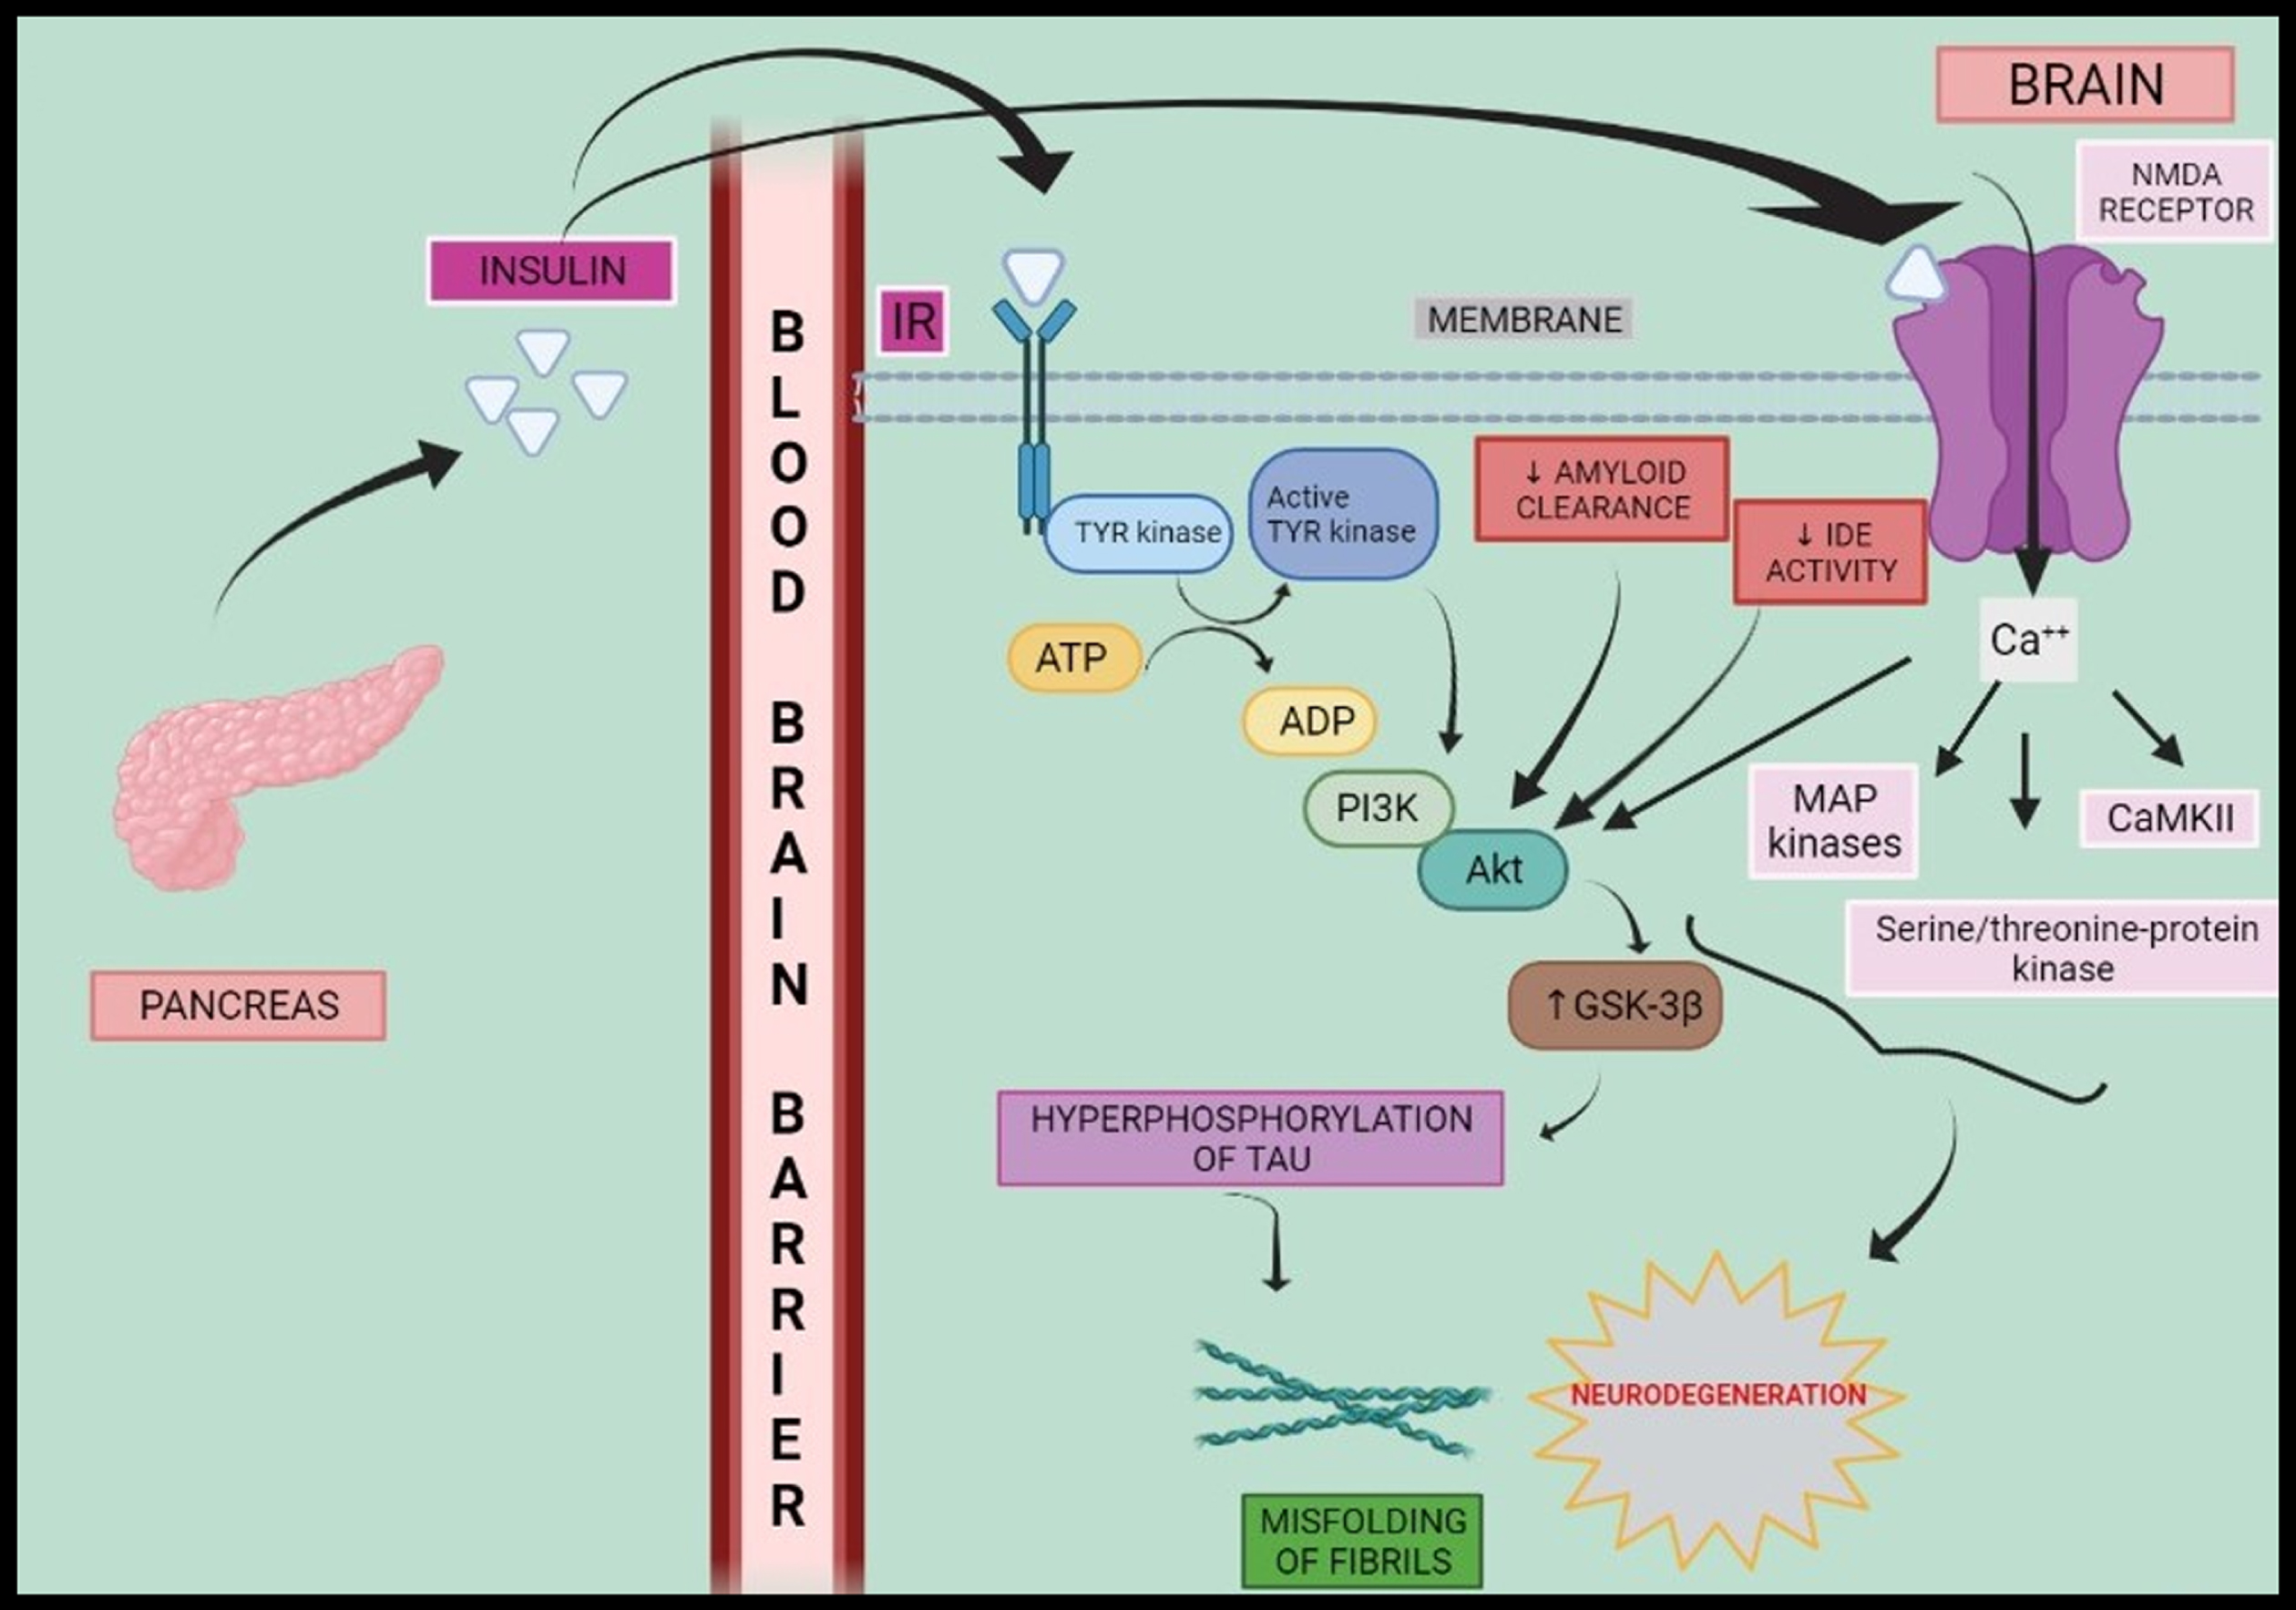 Schematic representation of insulin signalling and neurodegeneration. Peripheral hyperinsulinemia causes insulin to cross blood-brain barrier where it binds to IR and elicits a series of reactions such as phosphorylation of Tyrosine kinase and activation of PI3K-Akt as well as MAP kinases, serine/threonine-protein kinase, CaMKII which in turn elevates activity of GSK-3β and fasten the progresses to neurodegeneration via hyperphosphorylation of tau protein. IR, insulin receptor; ATP, adenosine triphosphate; ADP, adenosine diphosphate; Tyr kinase, tyrosine kinase; IDE, insulin degrading enzyme; PI3K, phosphoinositol-3-kinase; MAP kinase, mitogen activated protein kinase; CaMKII, calcium modulating protein dependent kinase-2; GSK-3β, glycogen synthase kinase-3β; NMDA receptor, N-methyl D-aspartate receptor.